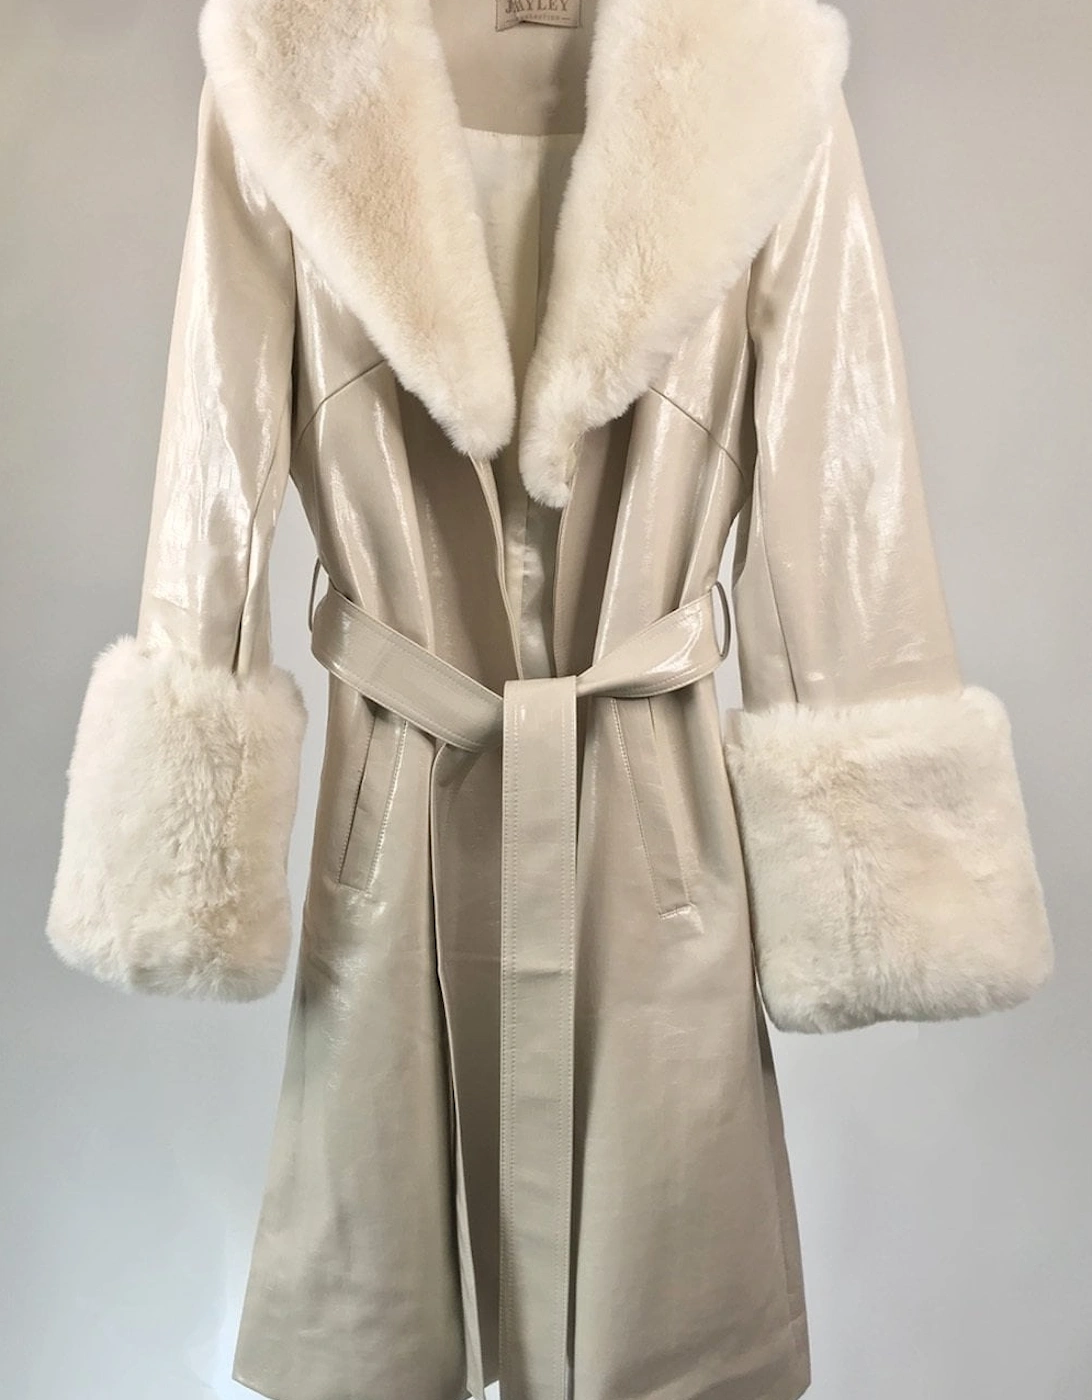 Cream Faux Suede Carrie Coat with Detachable Faux Fur Cuffs and Collar